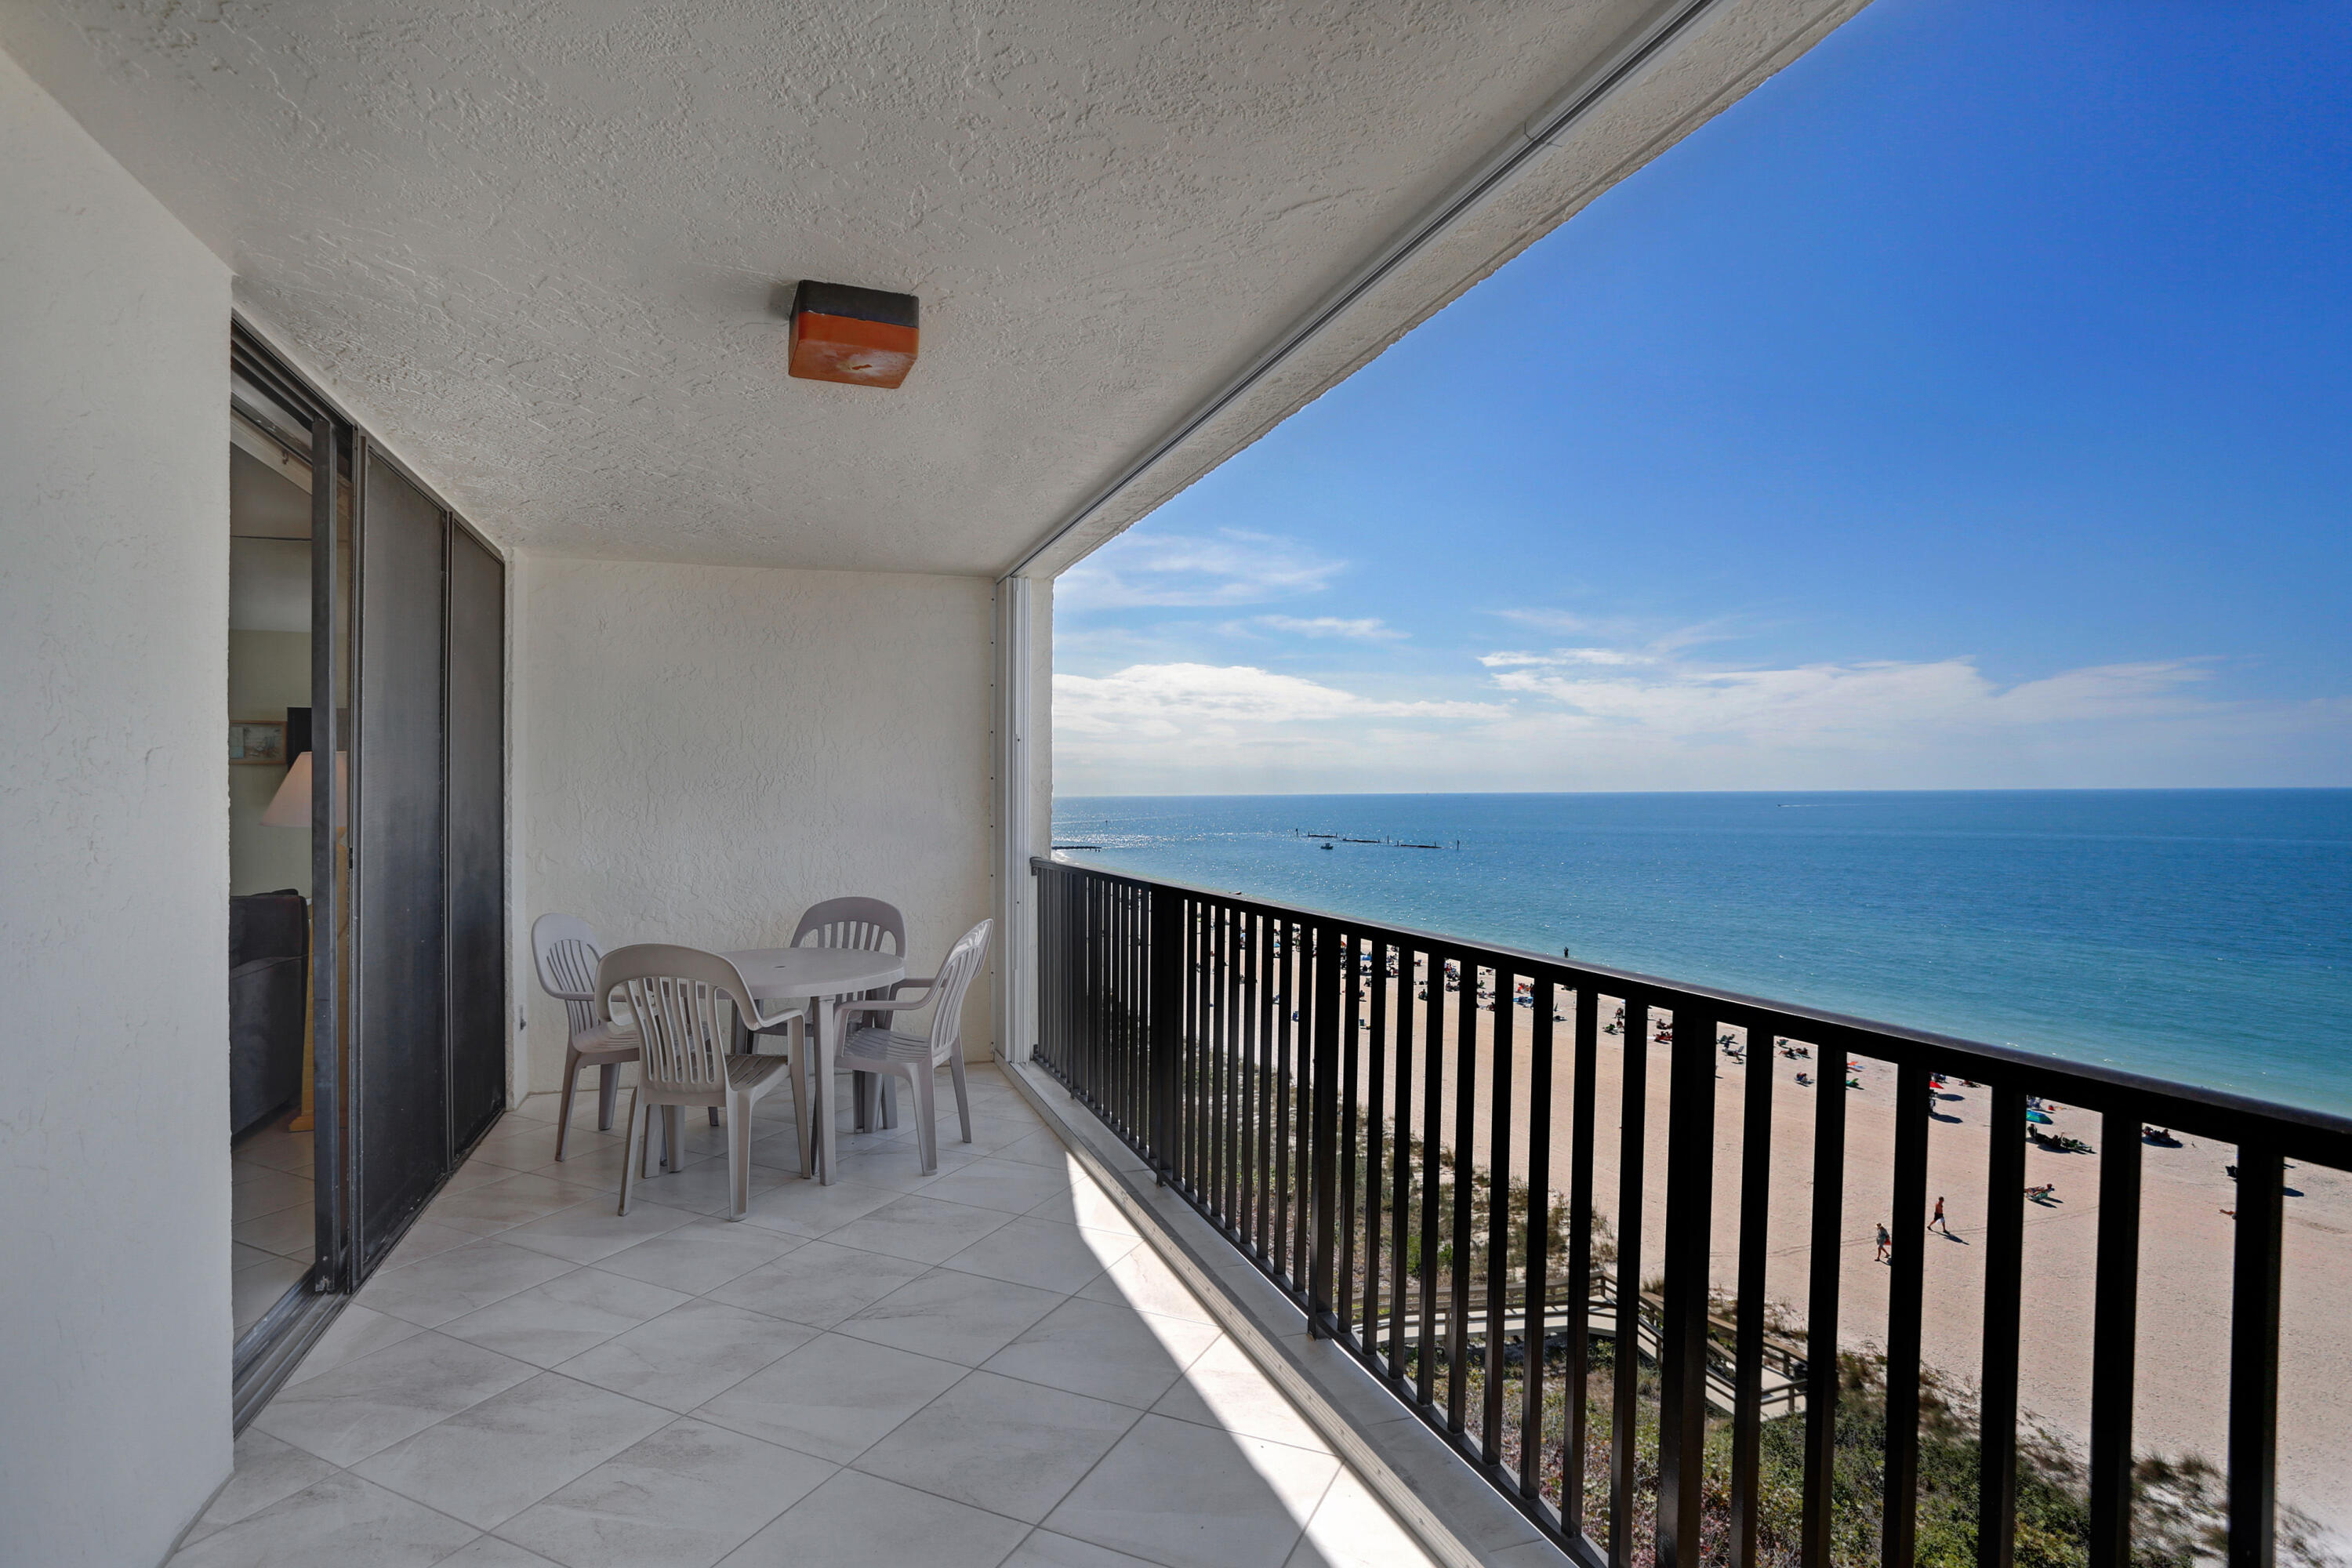 890 S Collier Boulevard Unit 804, Marco Island, Florida, 34145, United States, 2 Bedrooms Bedrooms, ,2 BathroomsBathrooms,Residential,For Sale,890 s collier BLVD unit 804,1499716